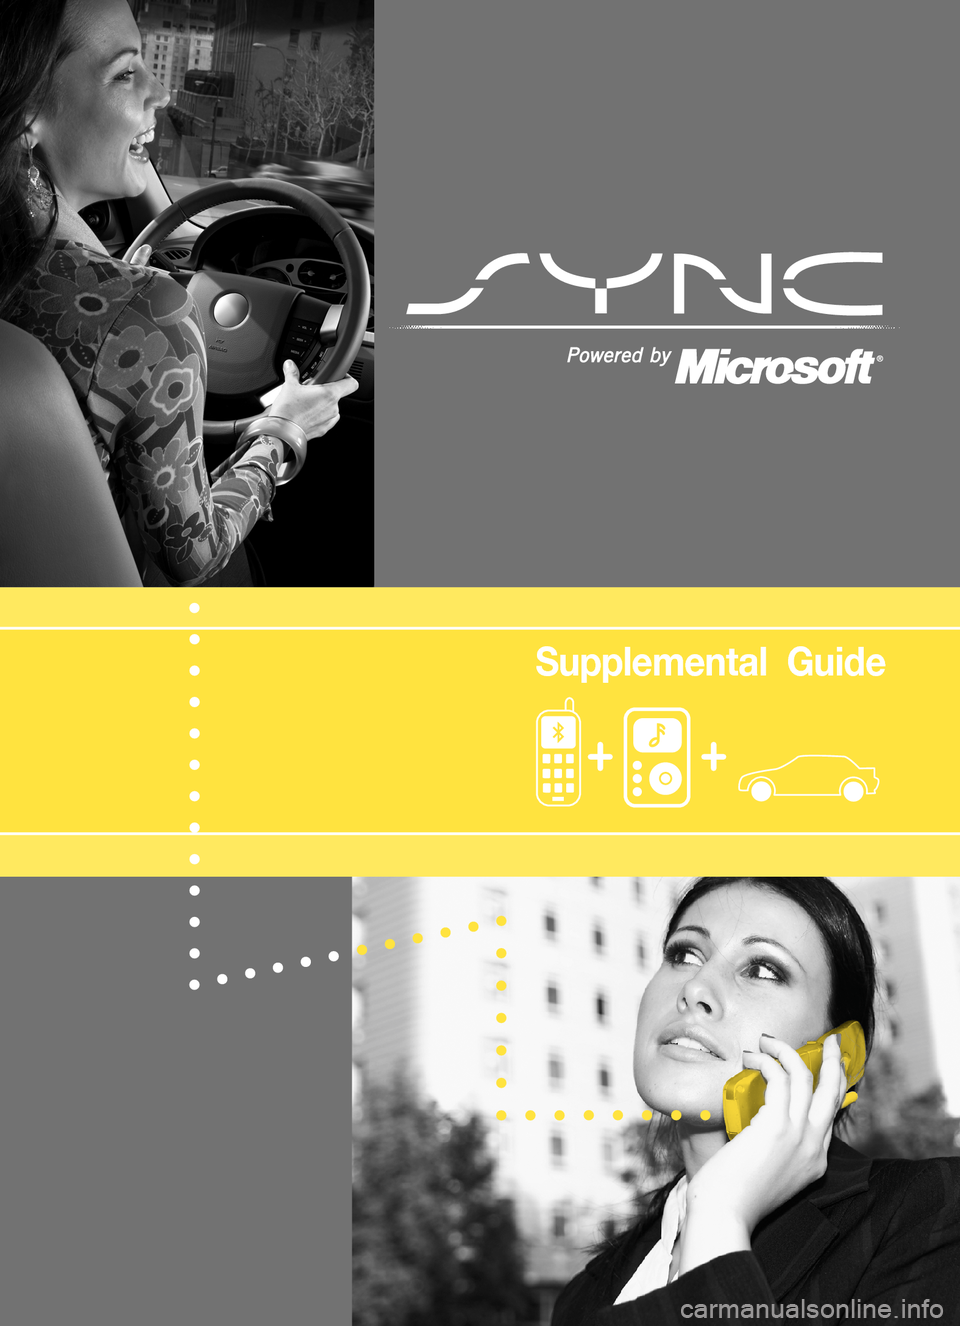 LINCOLN MKZ 2008  SYNC Supplement Manual www.SyncMyRide.com
8L2J 19A285 AA 
Supplemental Guide  |  July 2007 

Supplemental  Guide
97071  08 SYNC_MGM Supp.indd   1
97071 08 SYNC_MGM Supp.indd  